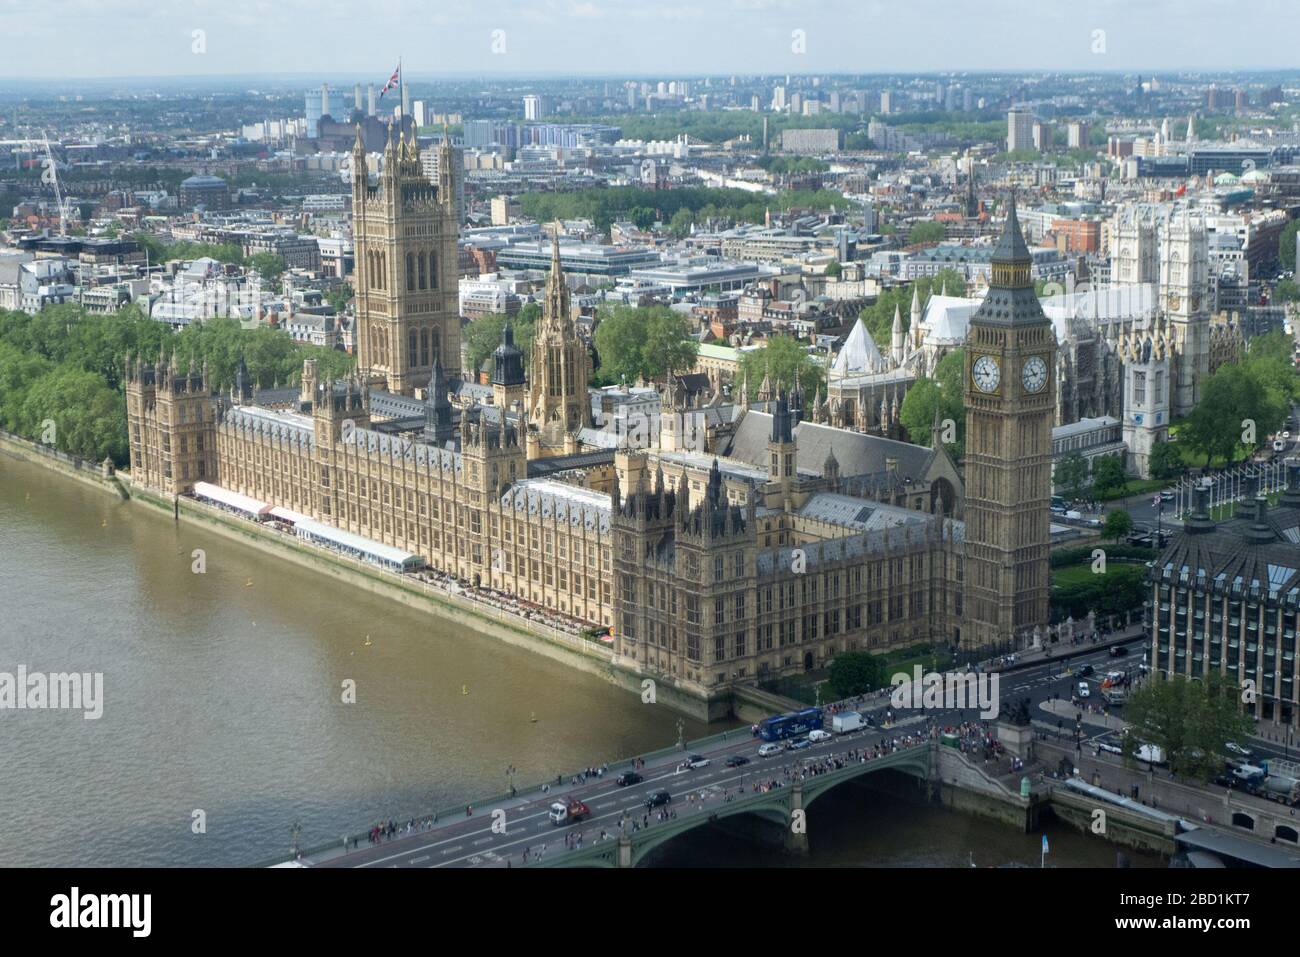 Palace of Westminster, London Stock Photo